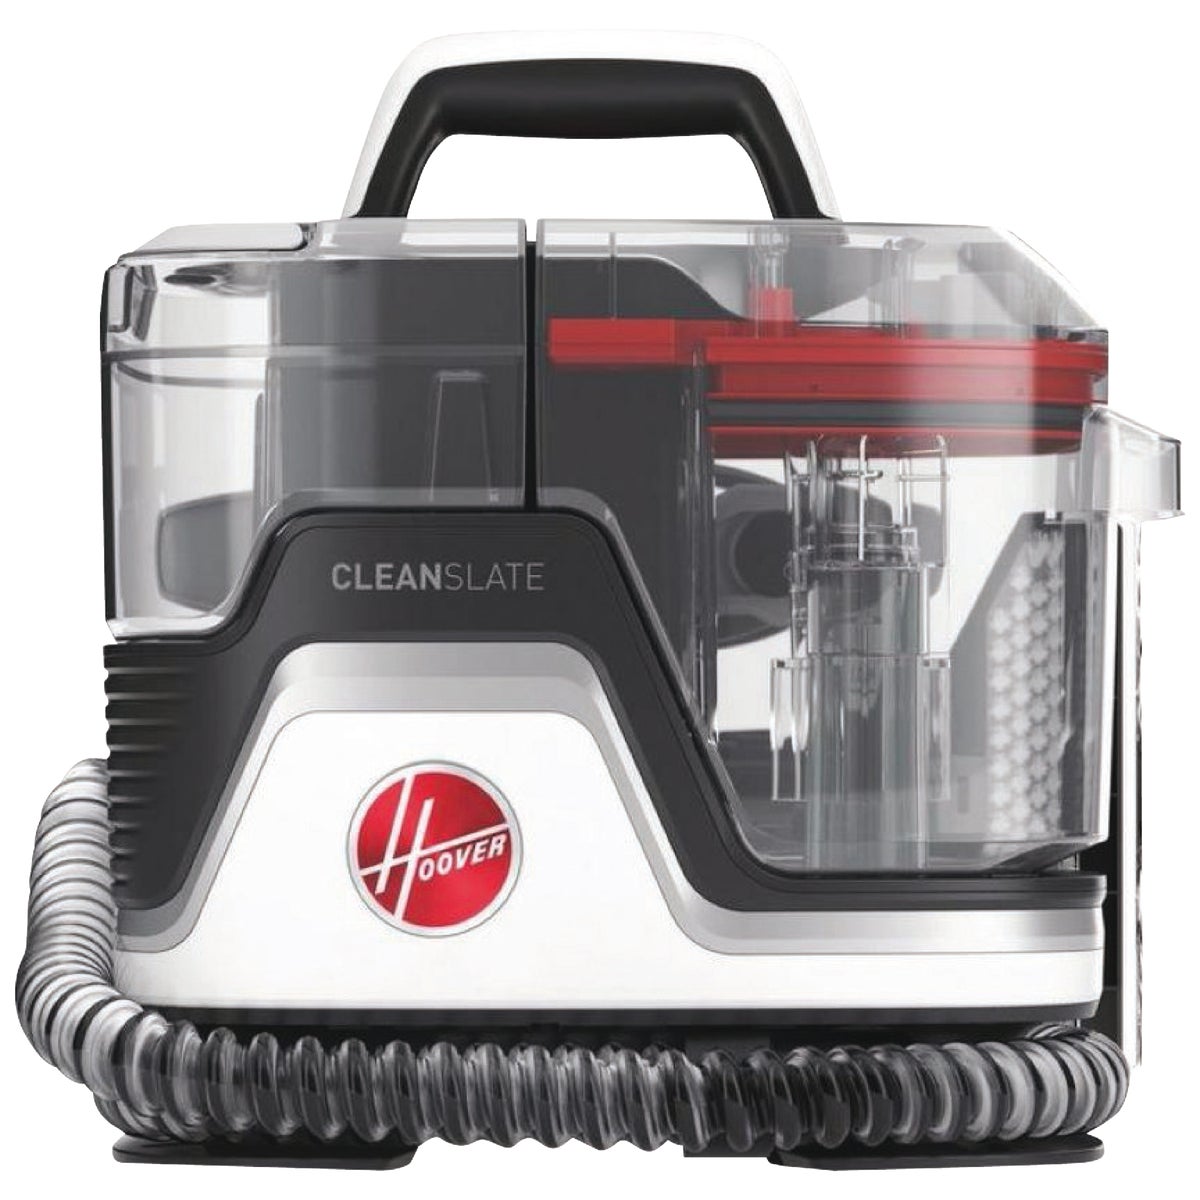 Hoover CleanSlate Portable Carpet & Upholstery Spot Cleaner Machine